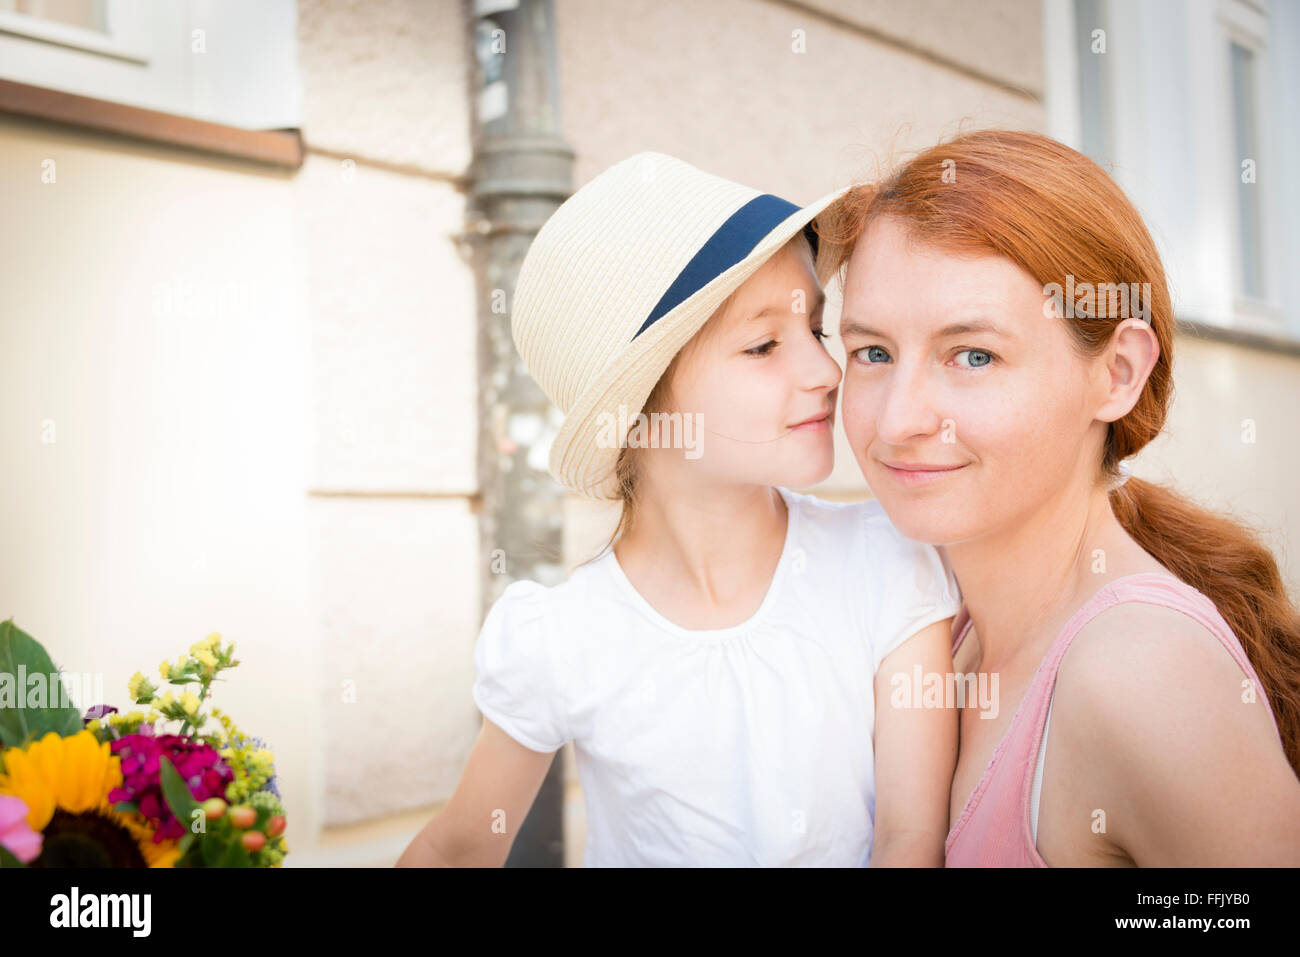 Portrait of mother with daughter in city Stock Photo